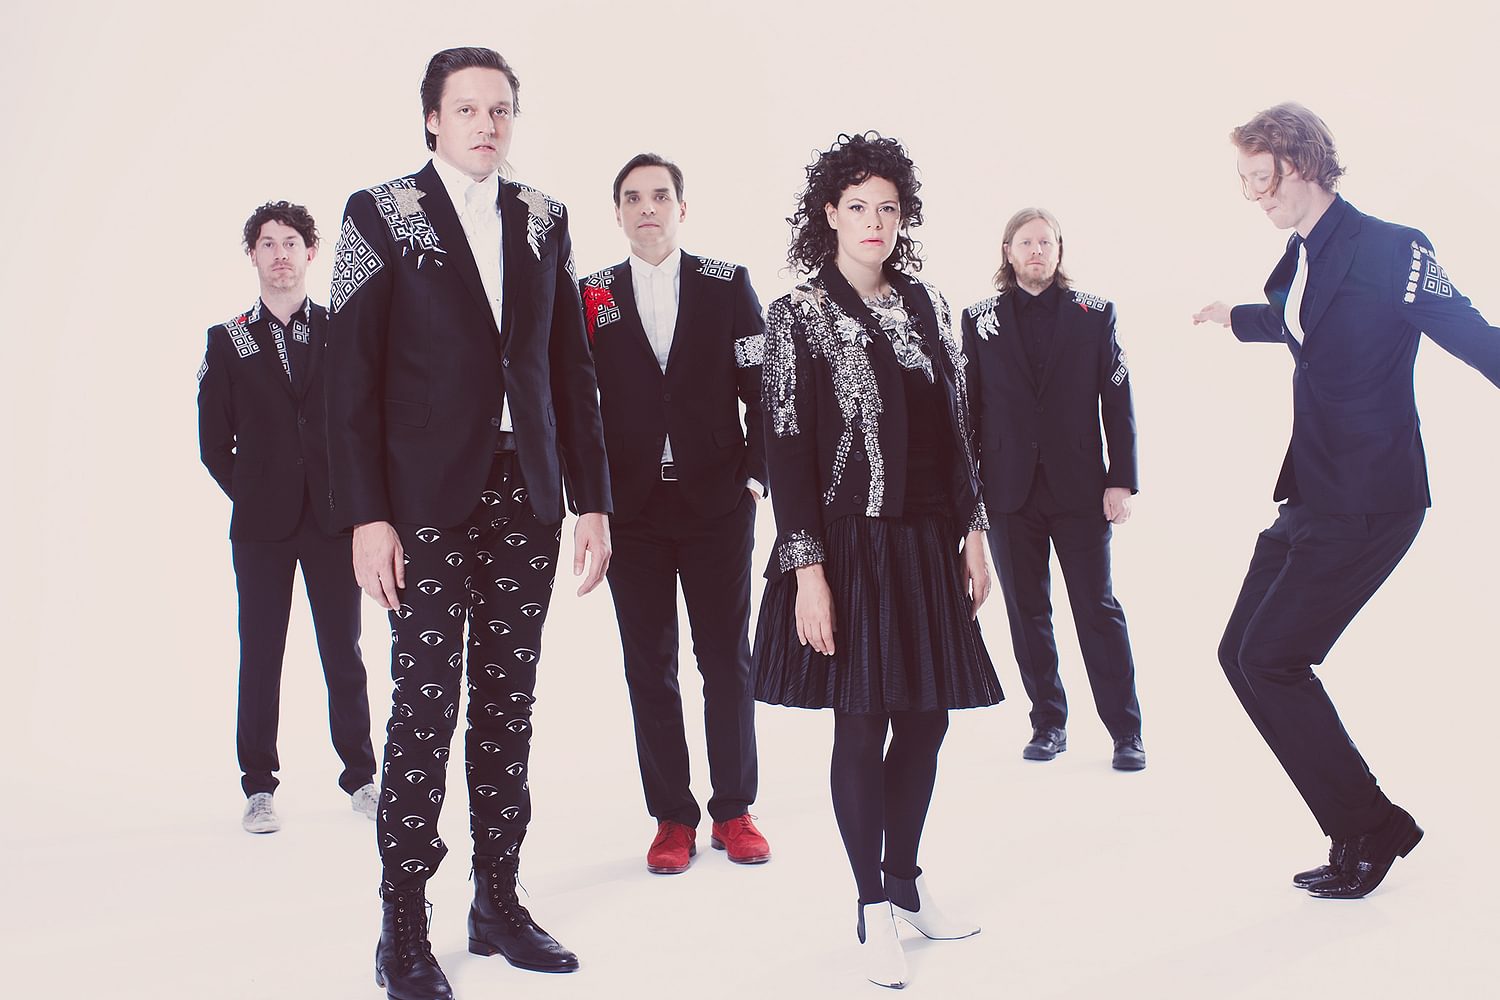 Arcade Fire feature on Fucked Up’s Damian Abraham’s latest podcast